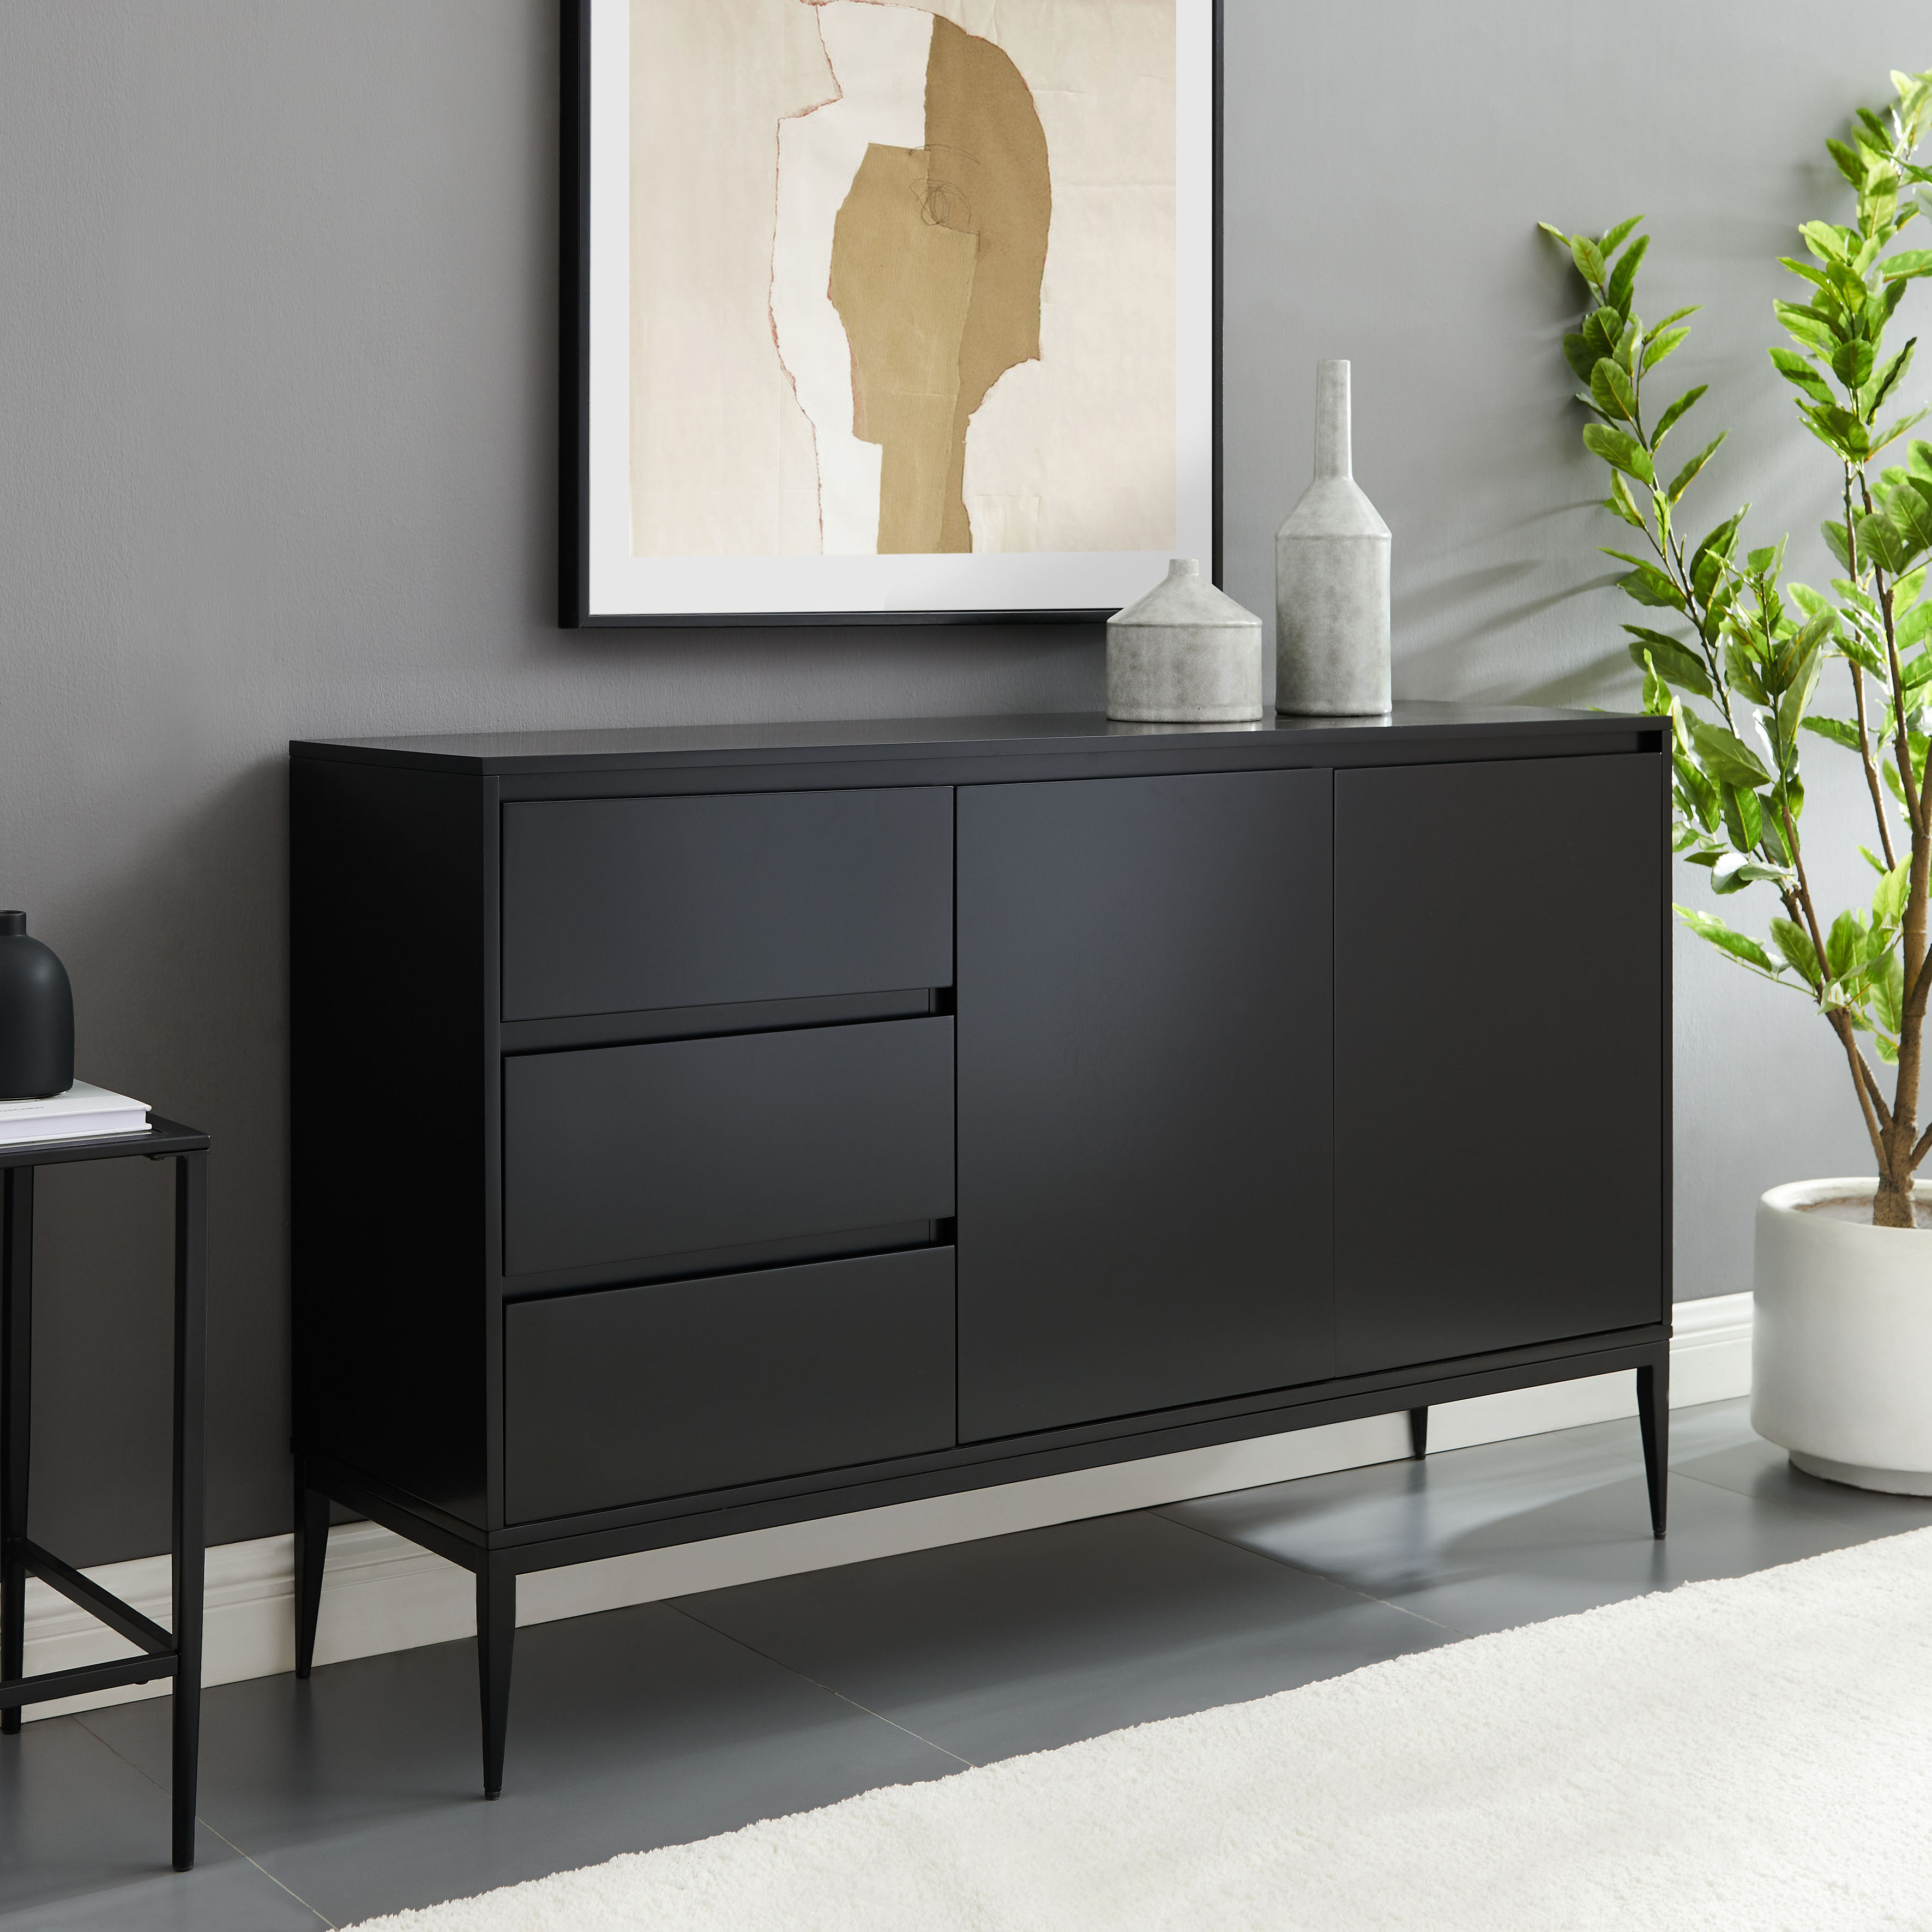 Places of Style Sideboard Saltaire, In modernem Design, Ganzmetall-Scharniere